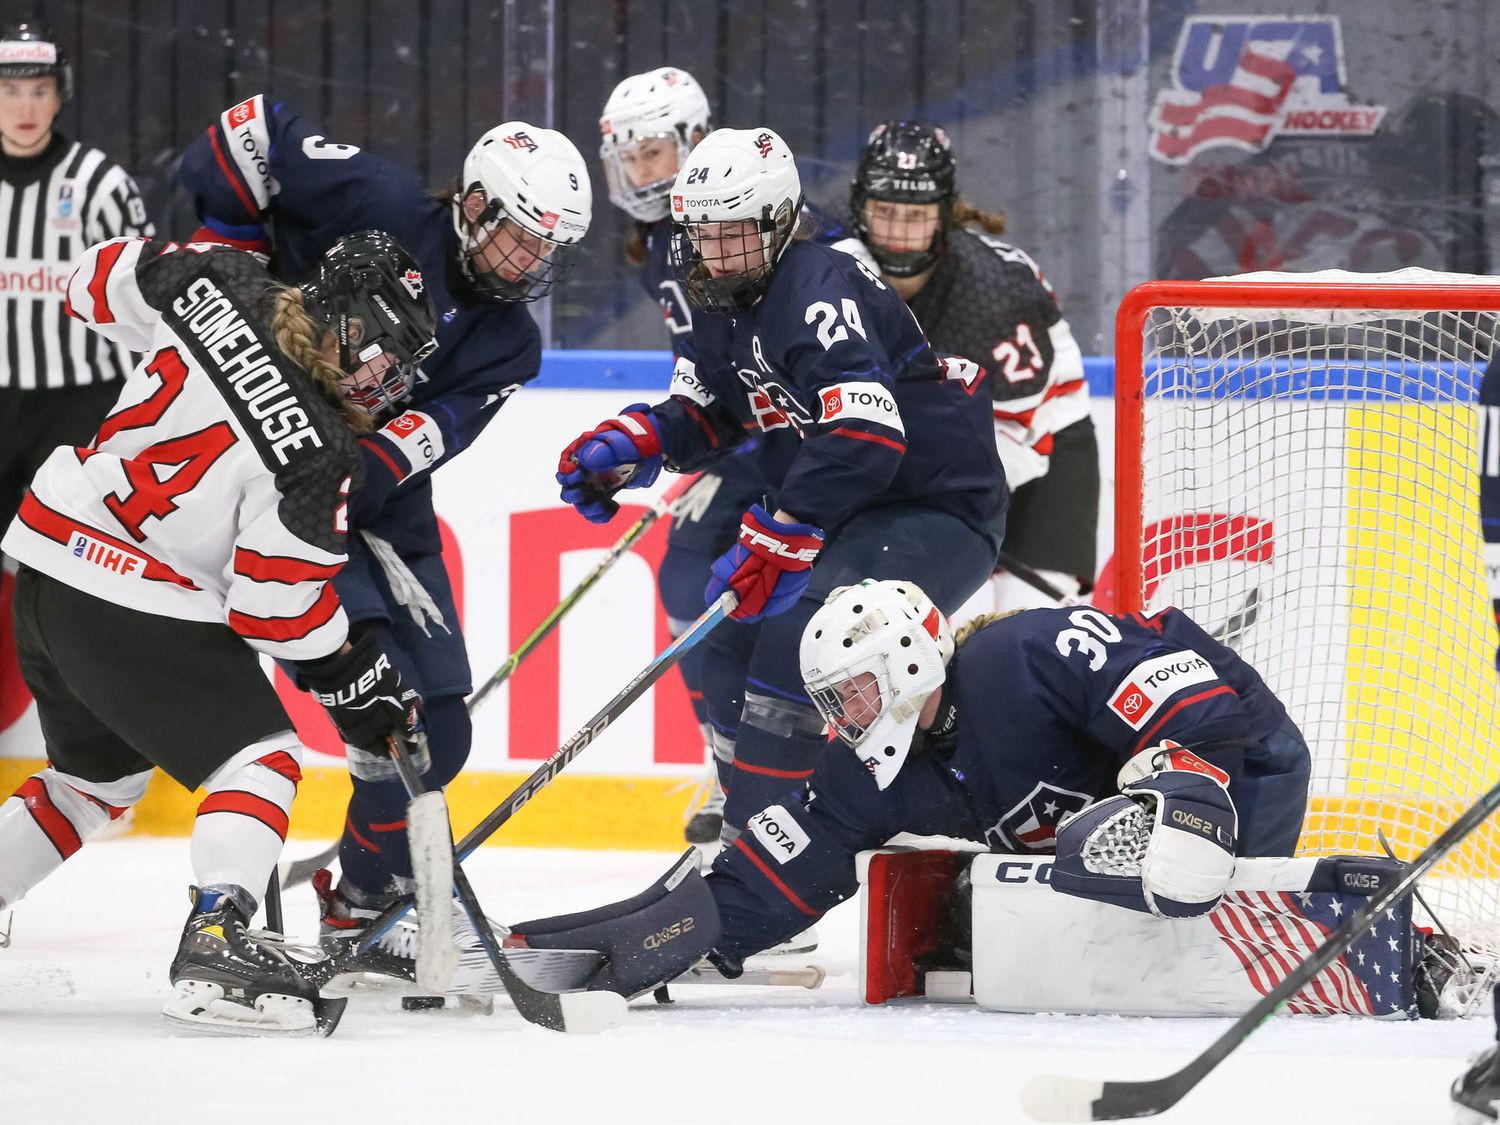 The United States and Canada have both secured direct routes to the last four of the Under-18 Women's World Ice Hockey Championship in Ostersund ©IIHF